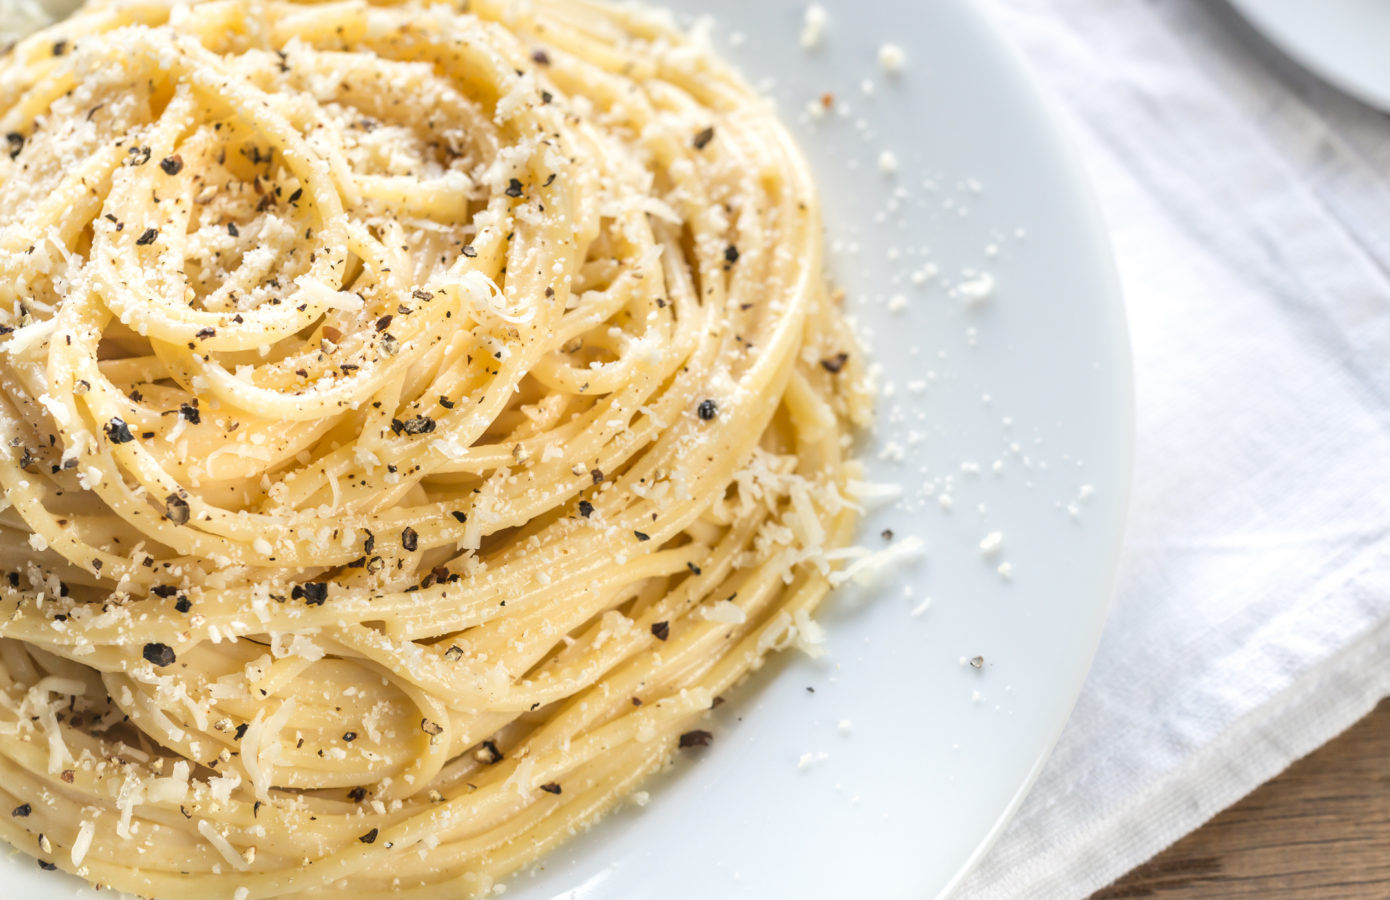 Love cacio e pepe? Here’s where you can get the best plates in Singapore